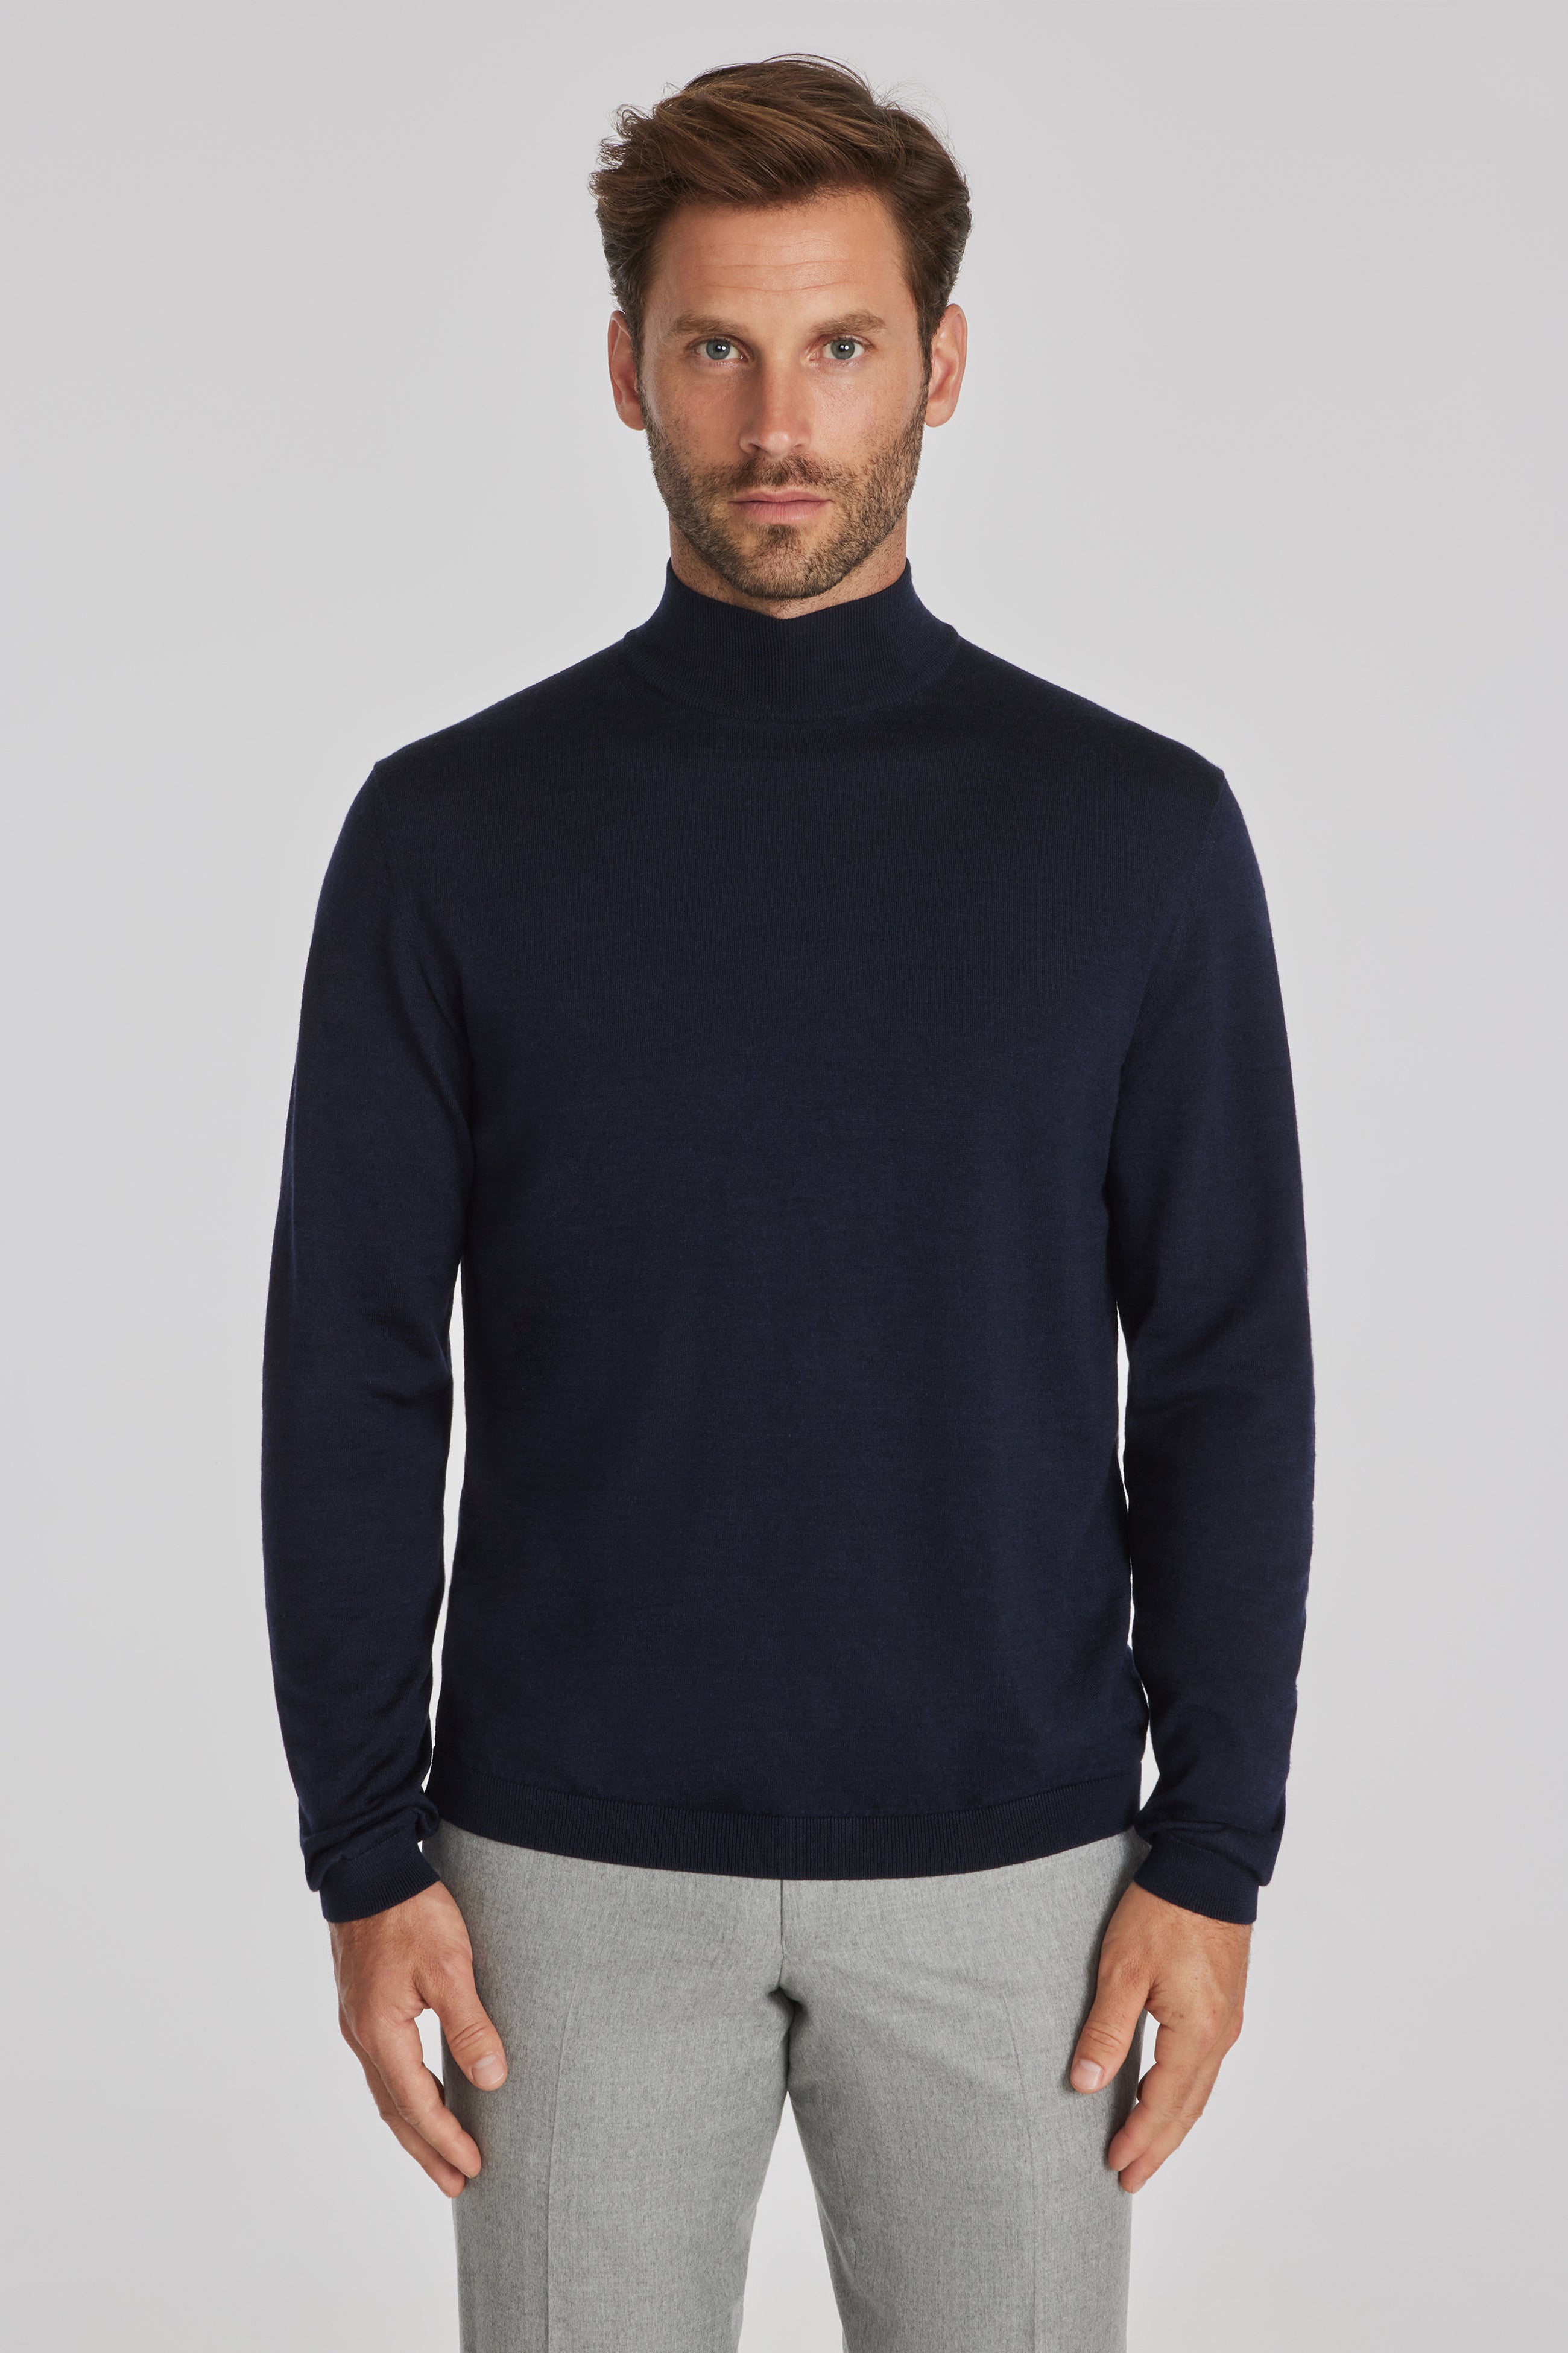 Alt view Beaudry Wool, Silk and Cashmere Mock Neck Sweater in Navy